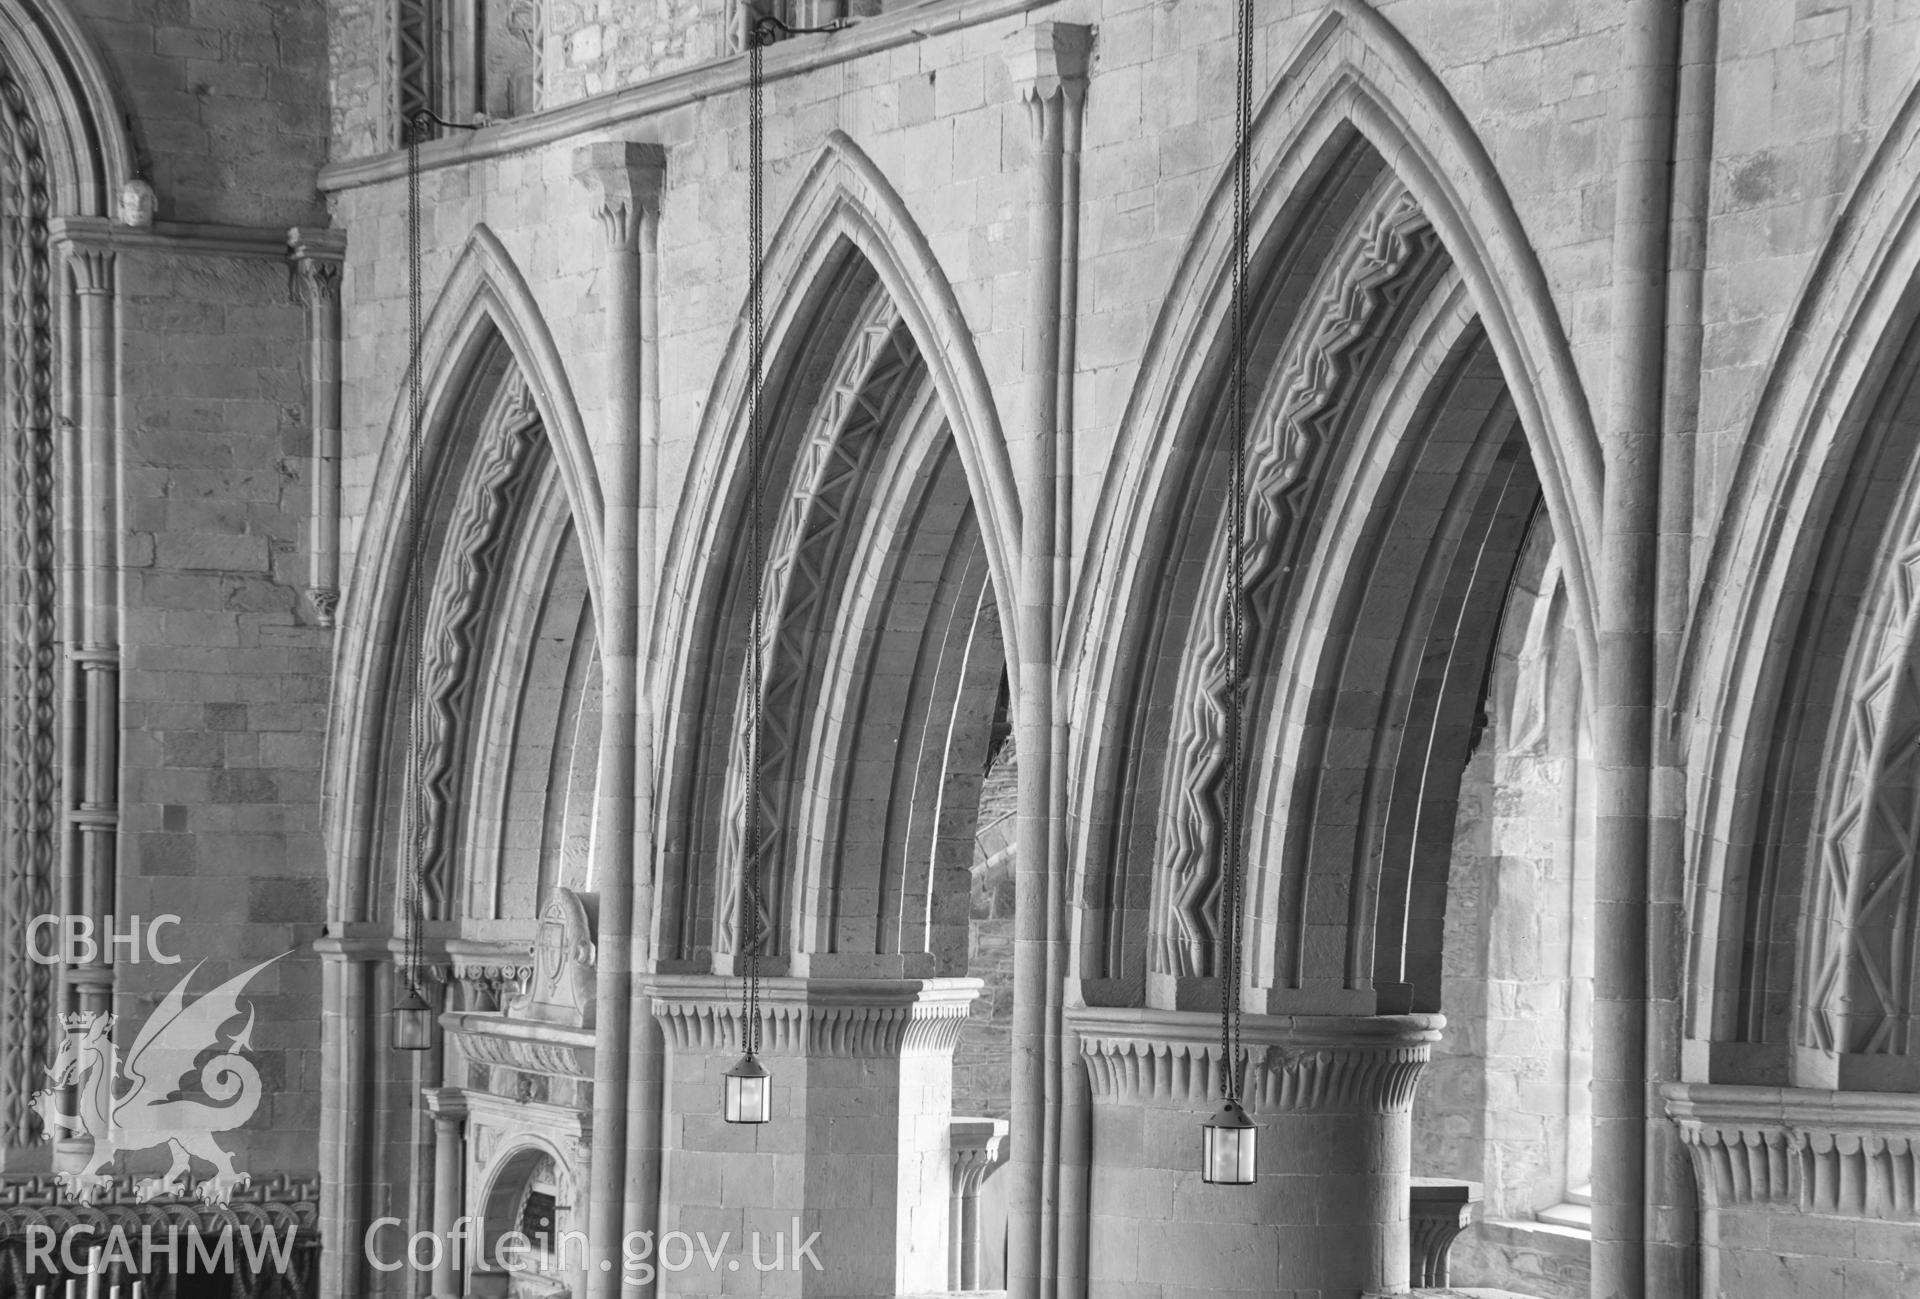 Digital copy of a black and white acetate negative showing interior arches at St. David's Cathedral, taken by E.W. Lovegrove, July 1936